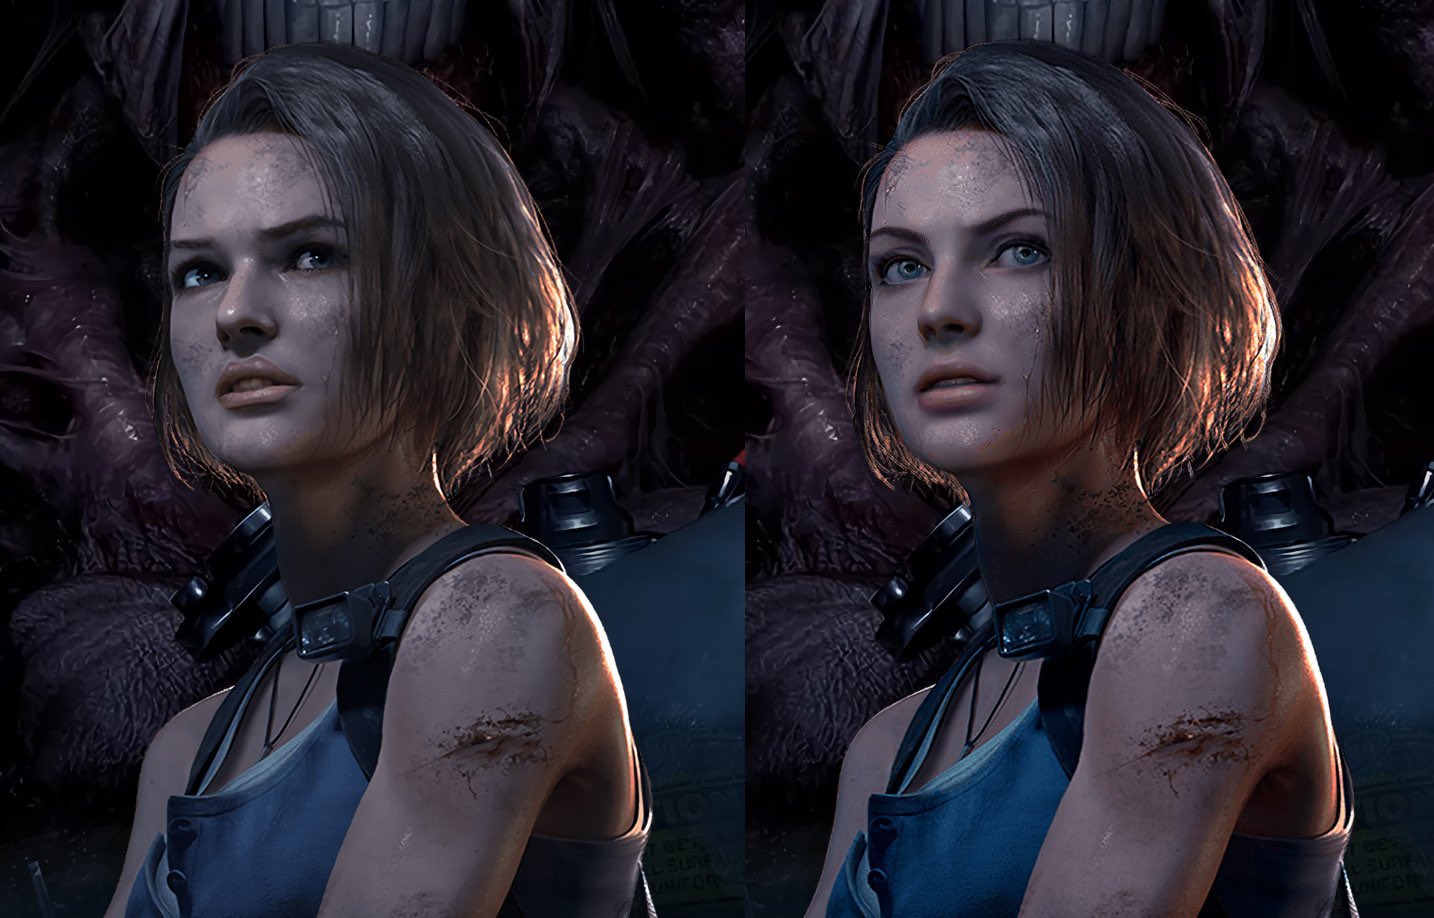 Check out this edit of Julia Voth’s face over the new Jill Valentine in RE3...